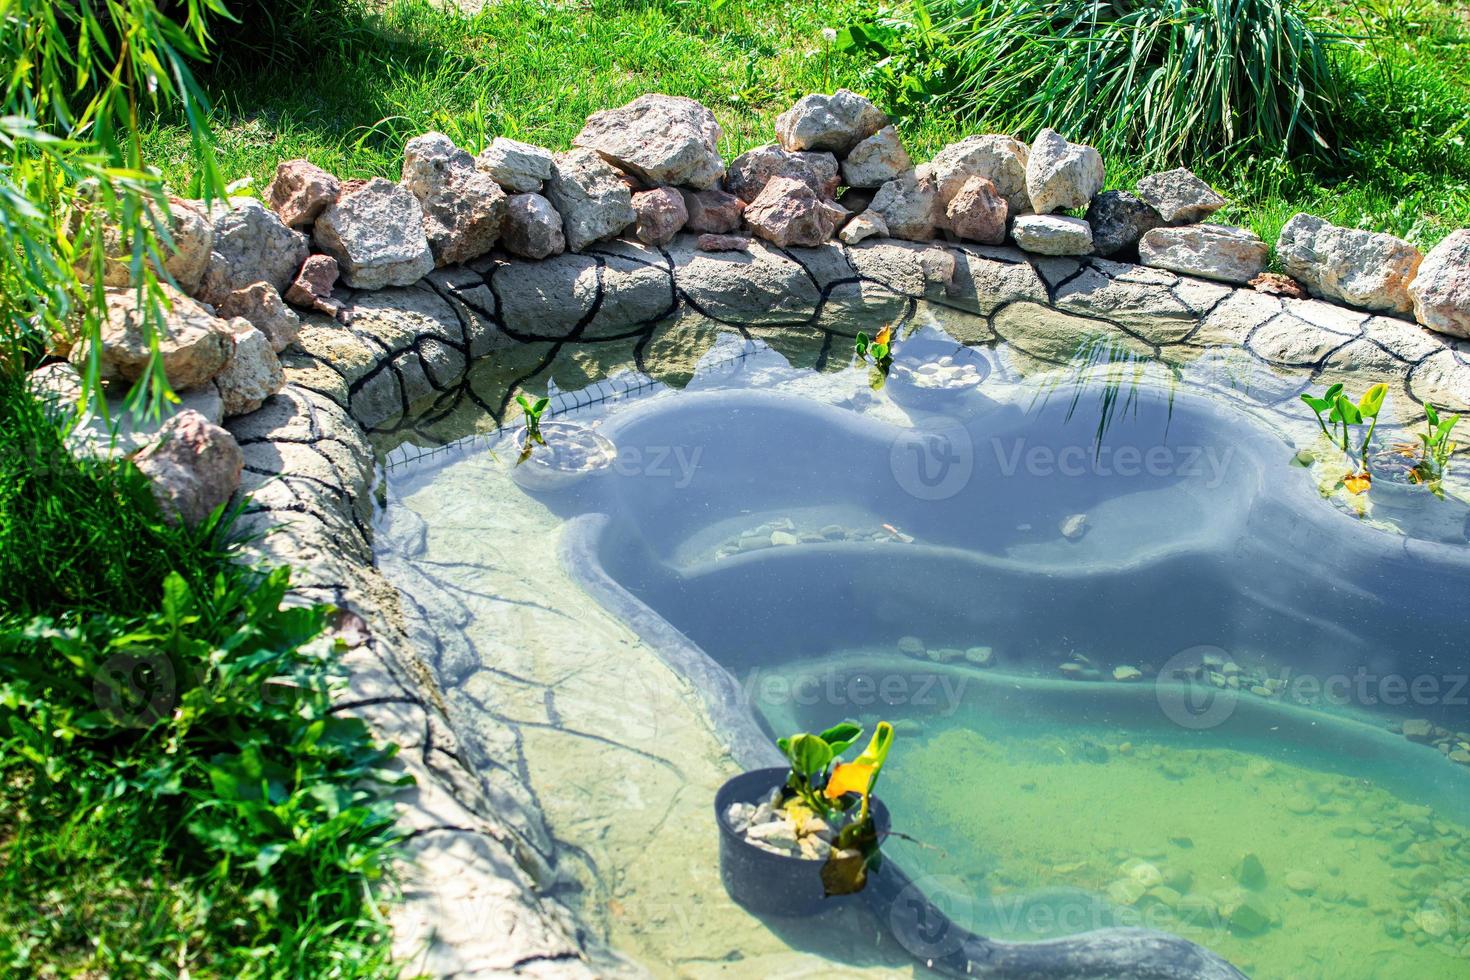 https://static.vecteezy.com/system/resources/previews/010/077/777/non_2x/small-pond-in-the-garden-as-landscaping-design-element-photo.jpg